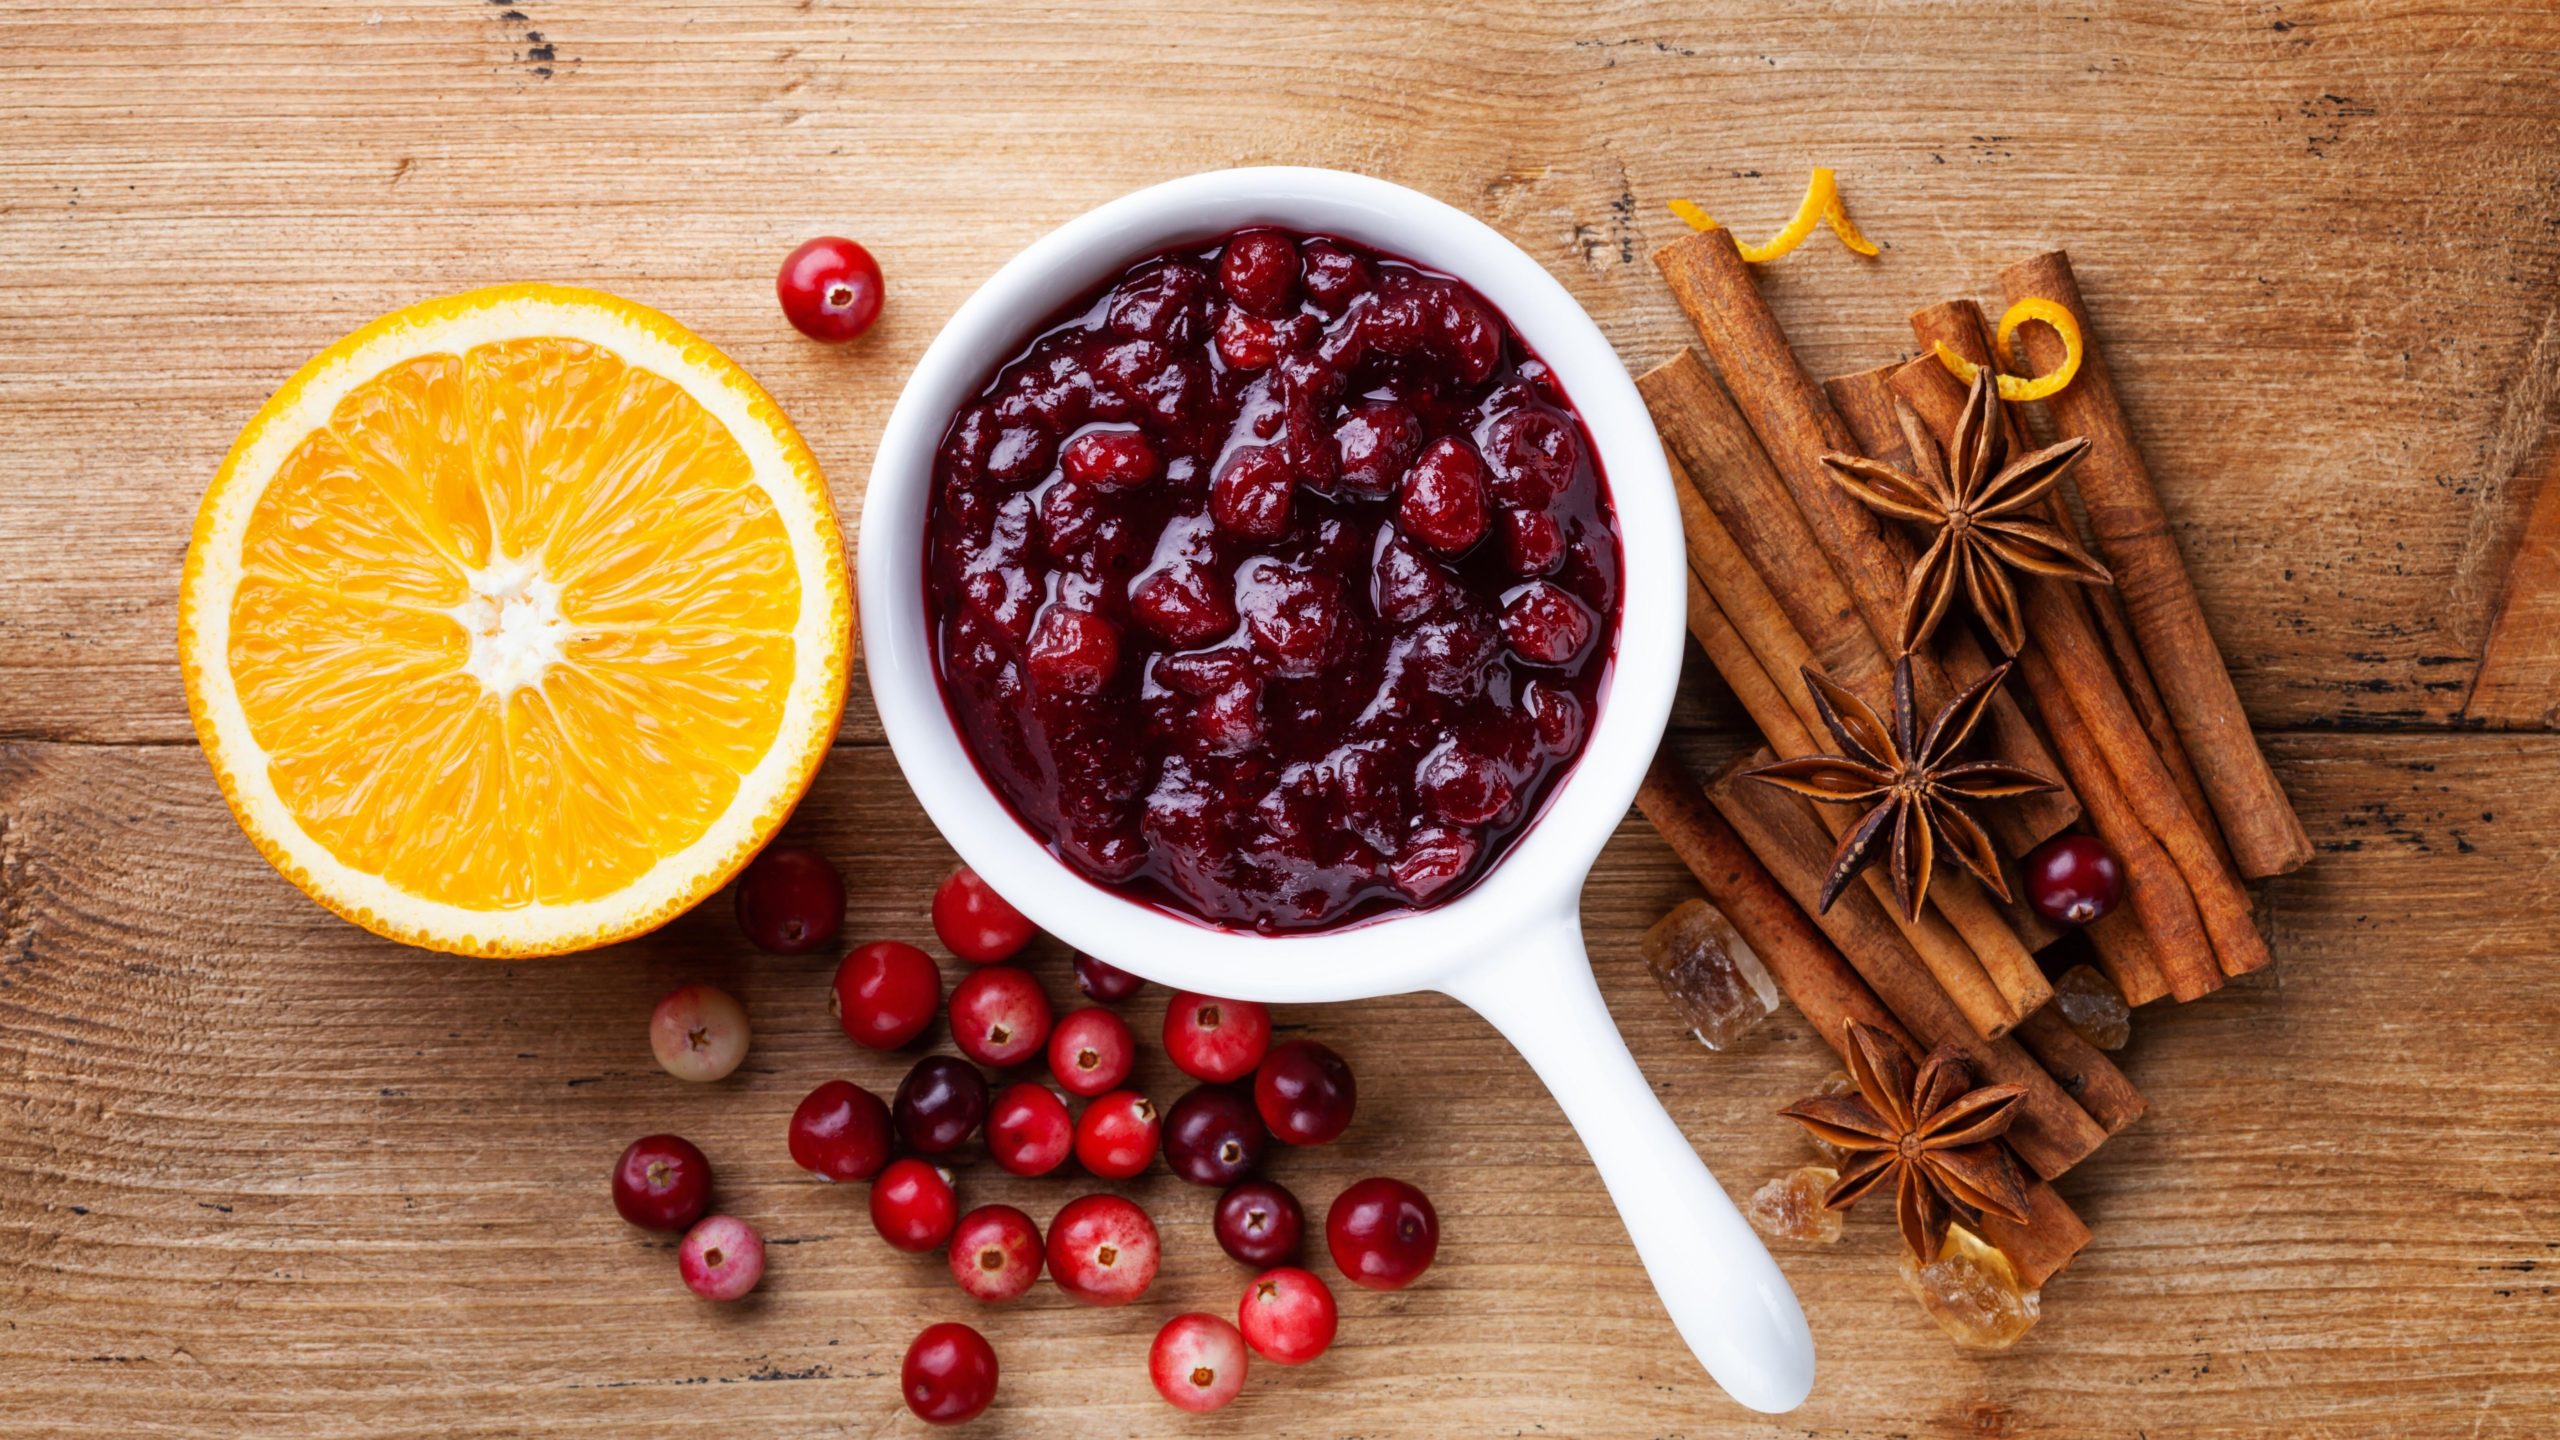 Add a Little Campari to Your Cranberry Sauce